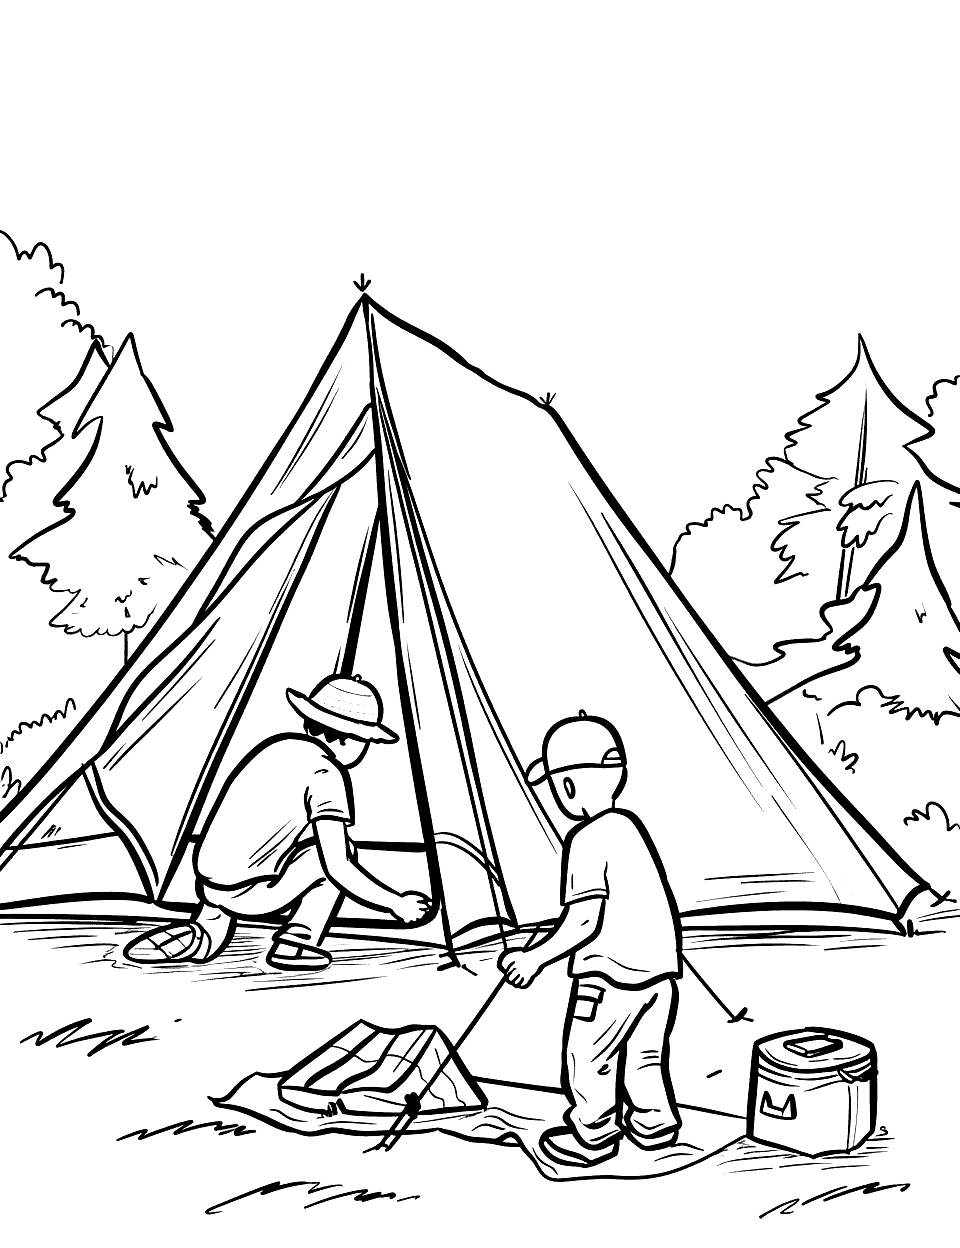 Tent Setup Lesson Camping Coloring Page - A parent showing a child how to pitch a tent.